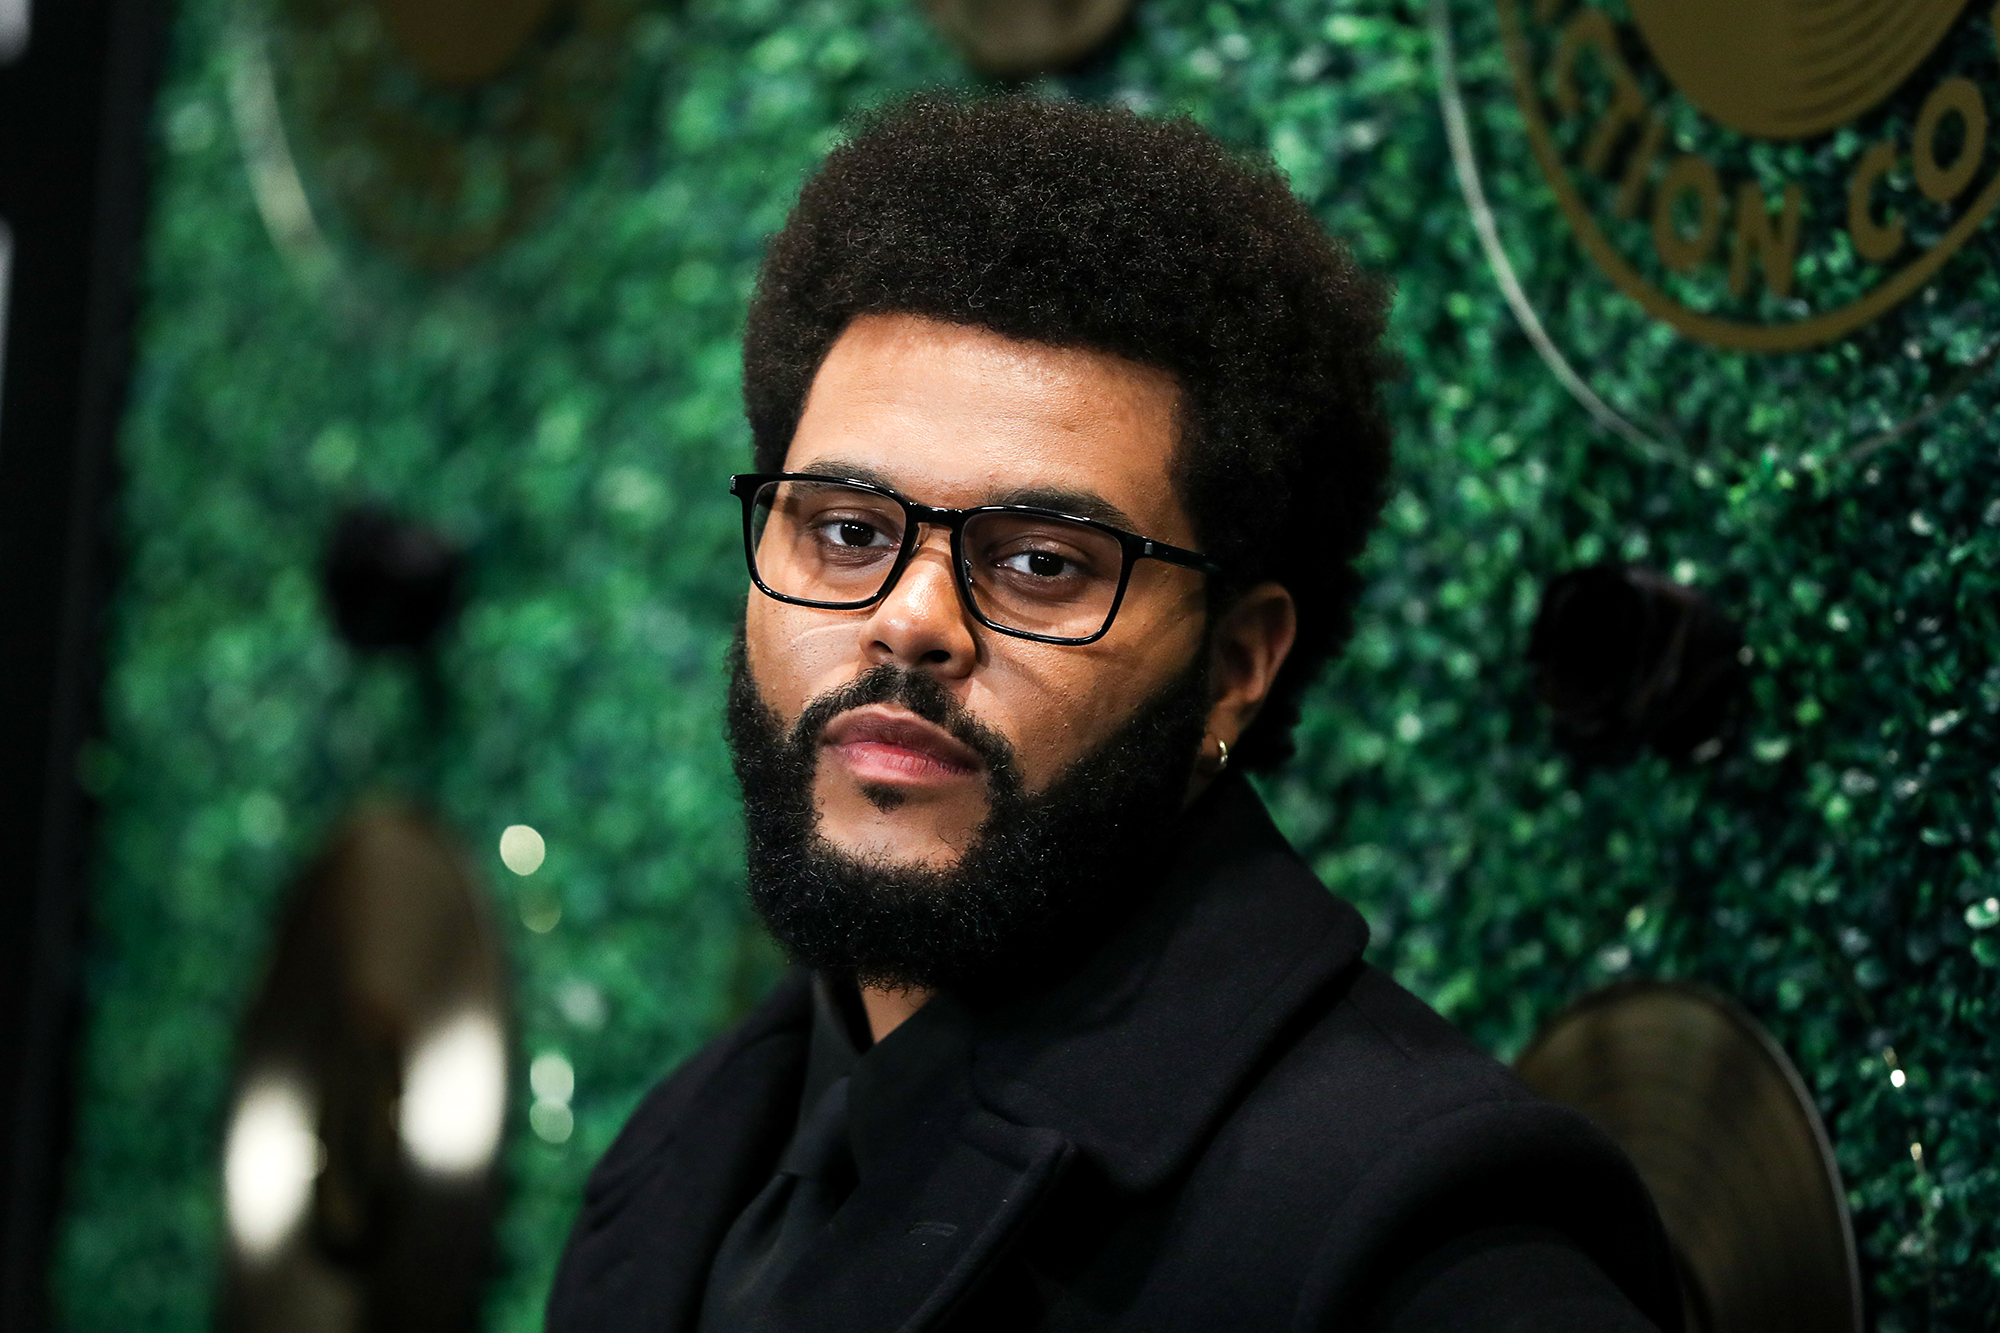 The Weeknd won't submit music to Grammys, despite changes - Los